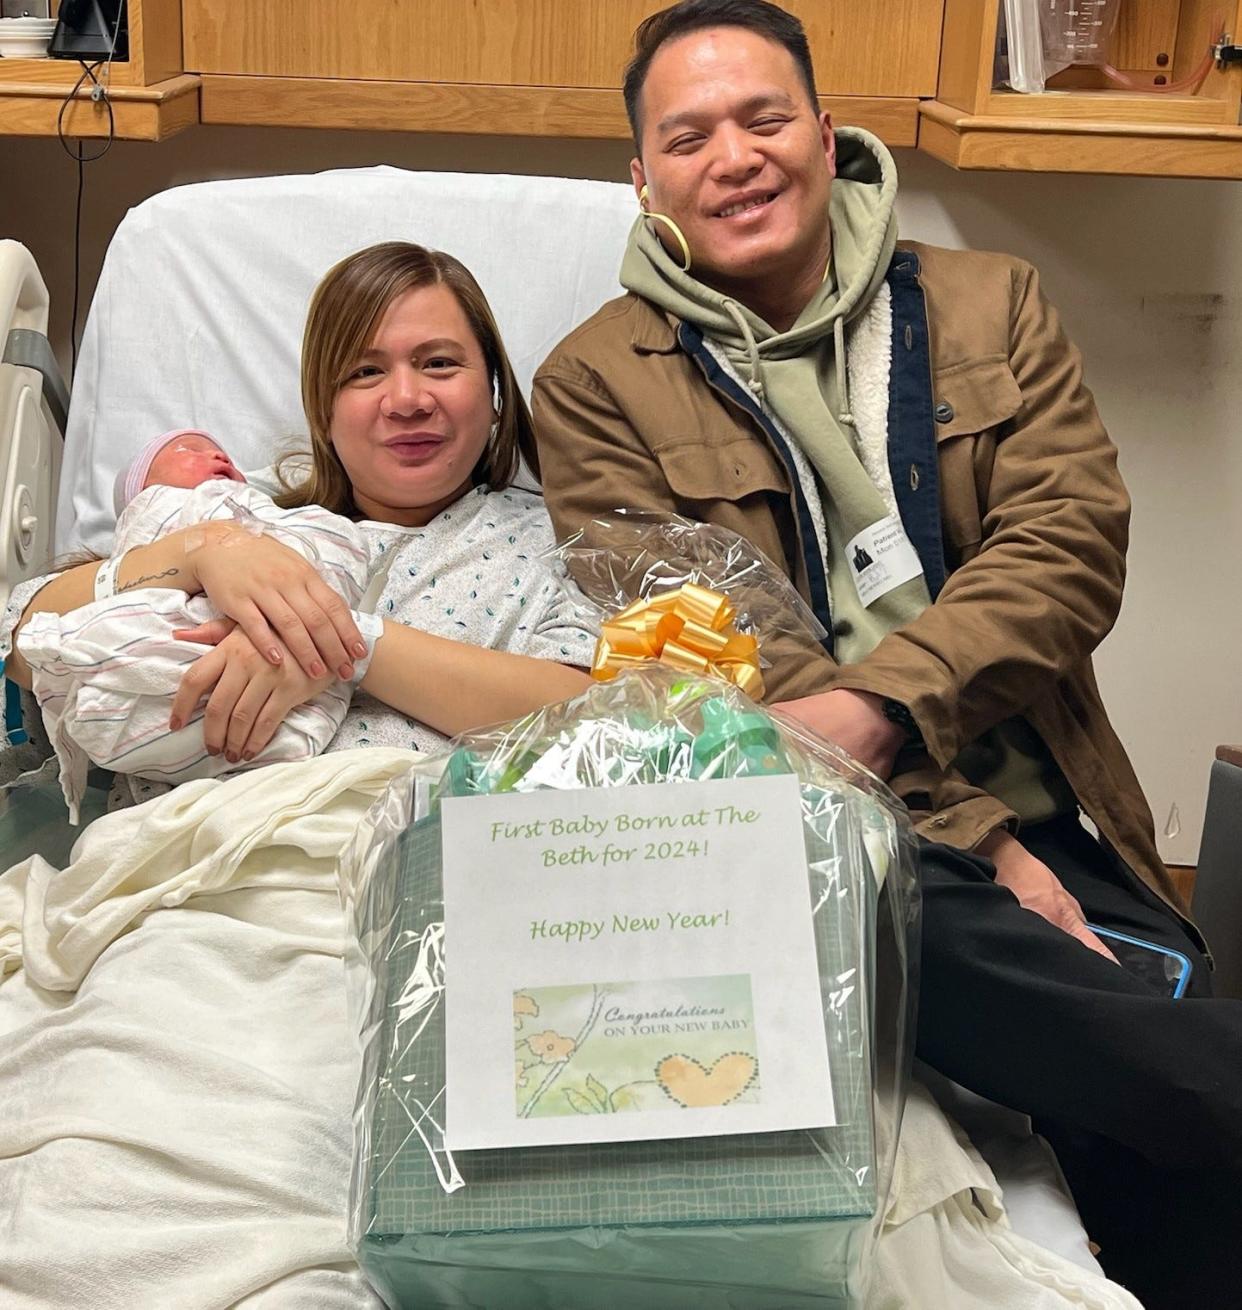 At Newark Beth Israel Medical Center, their New Year’s baby was born at 2:12 a.m. Maria Manganti of Newark gave birth to a girl, weighing in at 7 lbs 5 ounces and measuring 19.5 inches long.